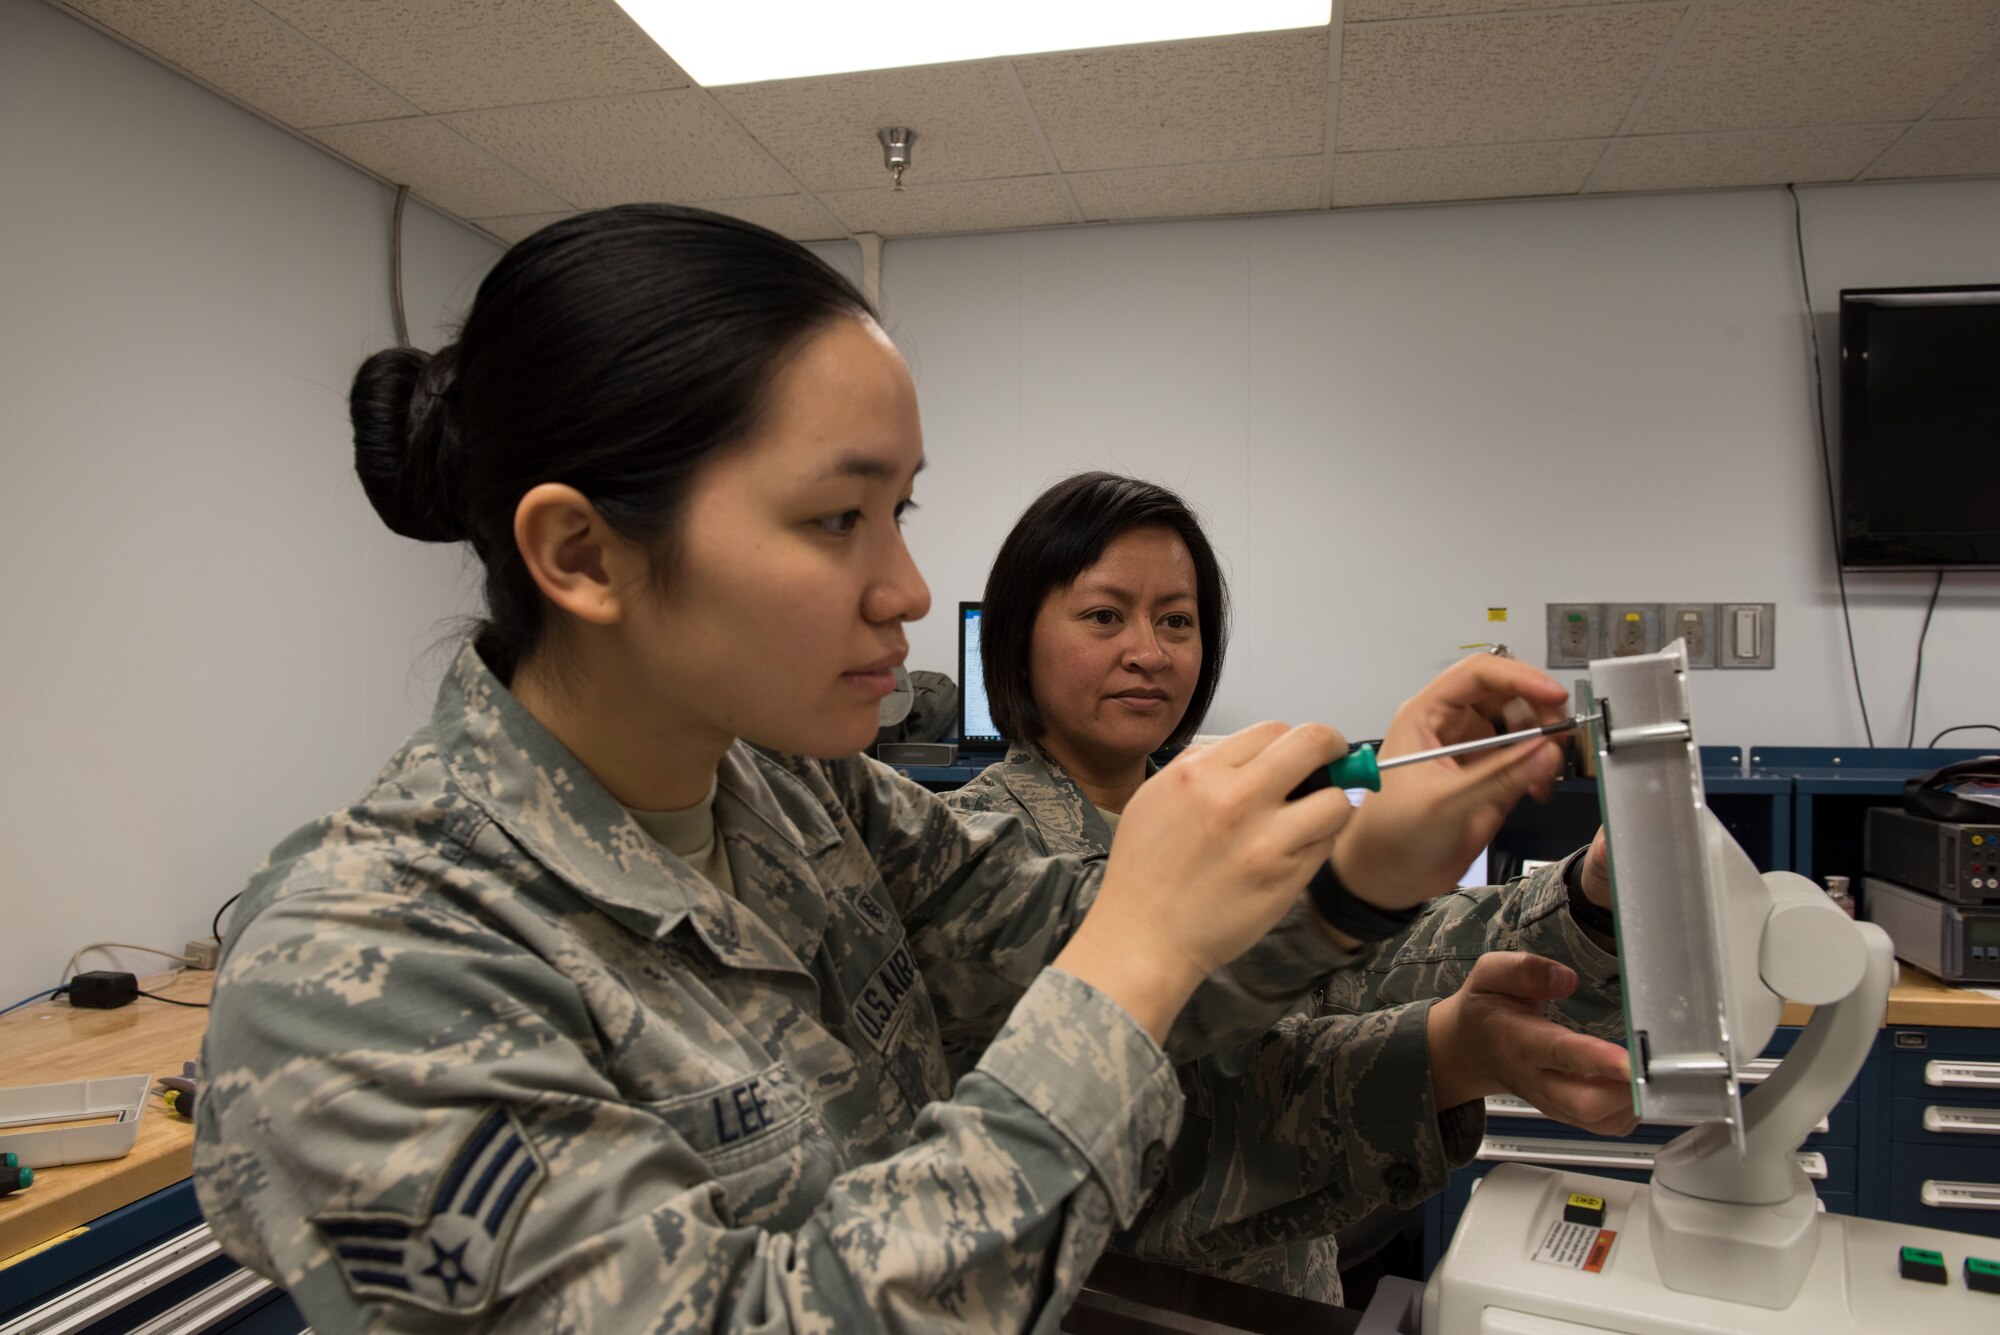 Tech. Sgt. Kristine Richardson, 39th Medical Support Squadron biomedical equipment NCO in charge, right, and Senior Airman Kirsten Lee, 39th MDSS biomedical equipment technician, left, install a screen on an X-ray machine March 29, 2019, at Incirlik Air Base, Turkey.